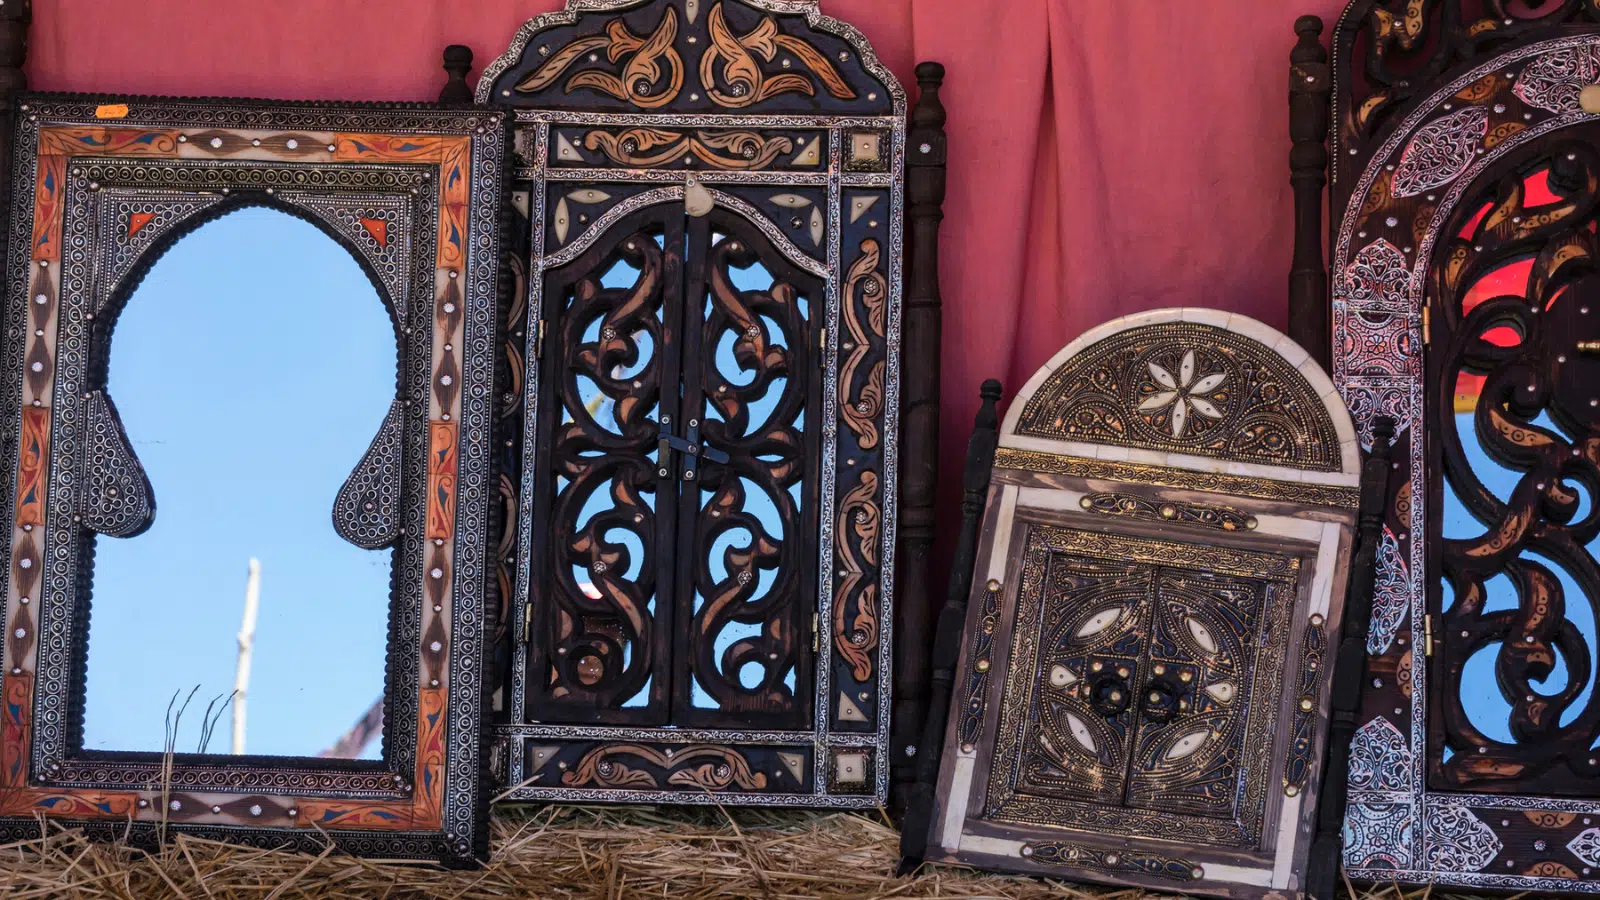 Four vintage mirrors against a wall.